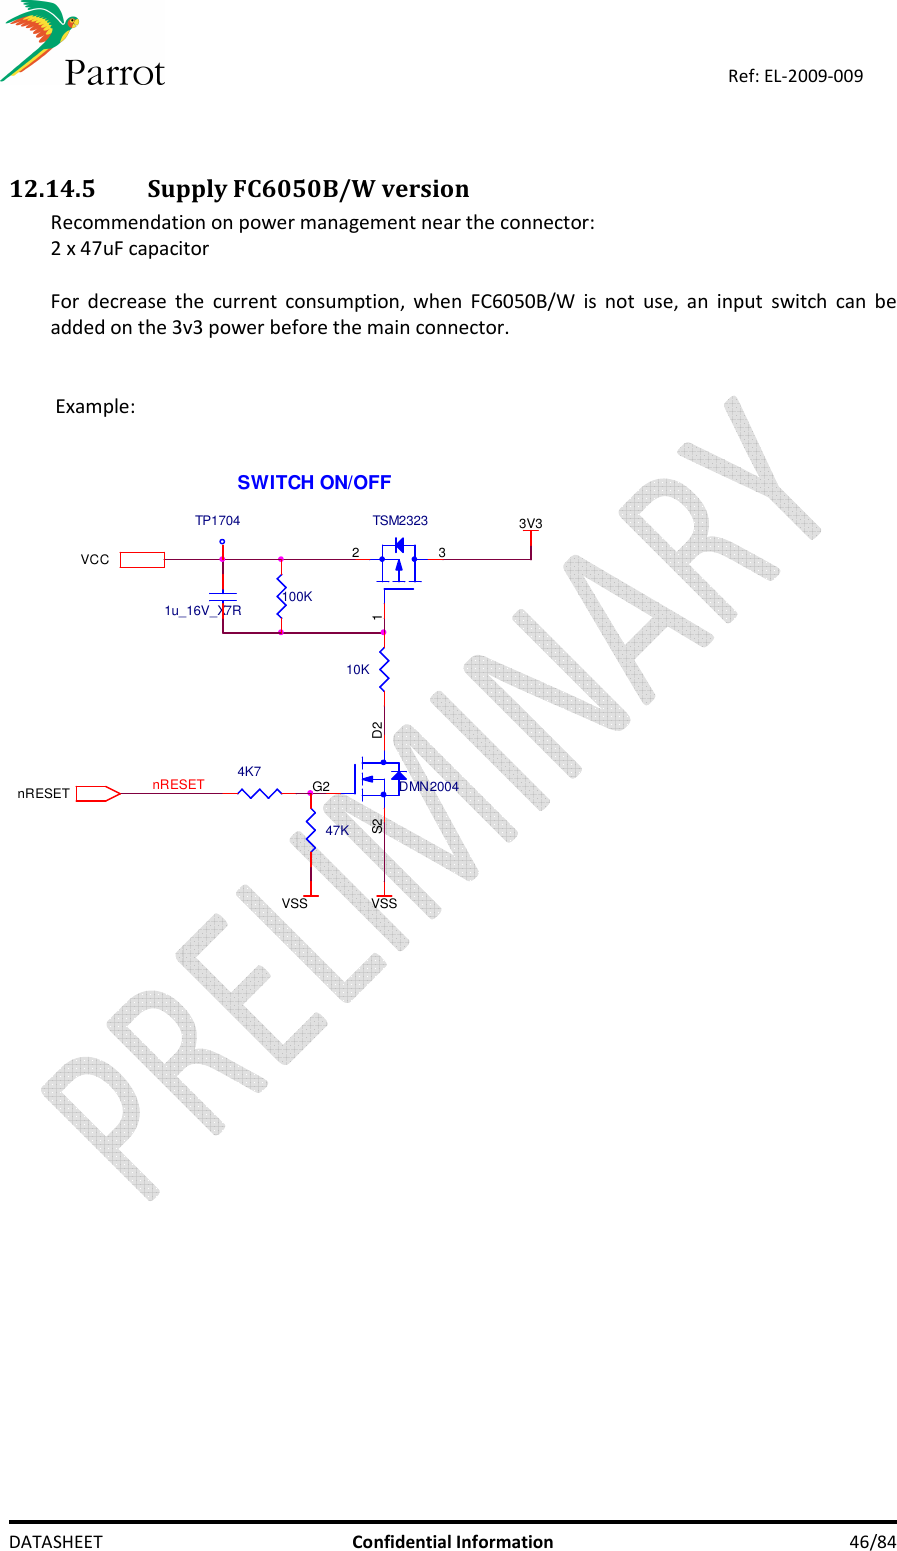    DATASHEET  Confidential Information  46/84 Ref: EL-2009-009   12.14.5 Supply FC6050B/W version Recommendation on power management near the connector:  2 x 47uF capacitor  For  decrease  the  current  consumption,  when  FC6050B/W  is  not  use,  an  input  switch  can  be added on the 3v3 power before the main connector.     Example:    nRESETTSM2323312VSS10KVCCnRESETSWITCH ON/OFF3V3100K1u_16V_X7RTP1704DMN2004D2G2S24K747KVSS 